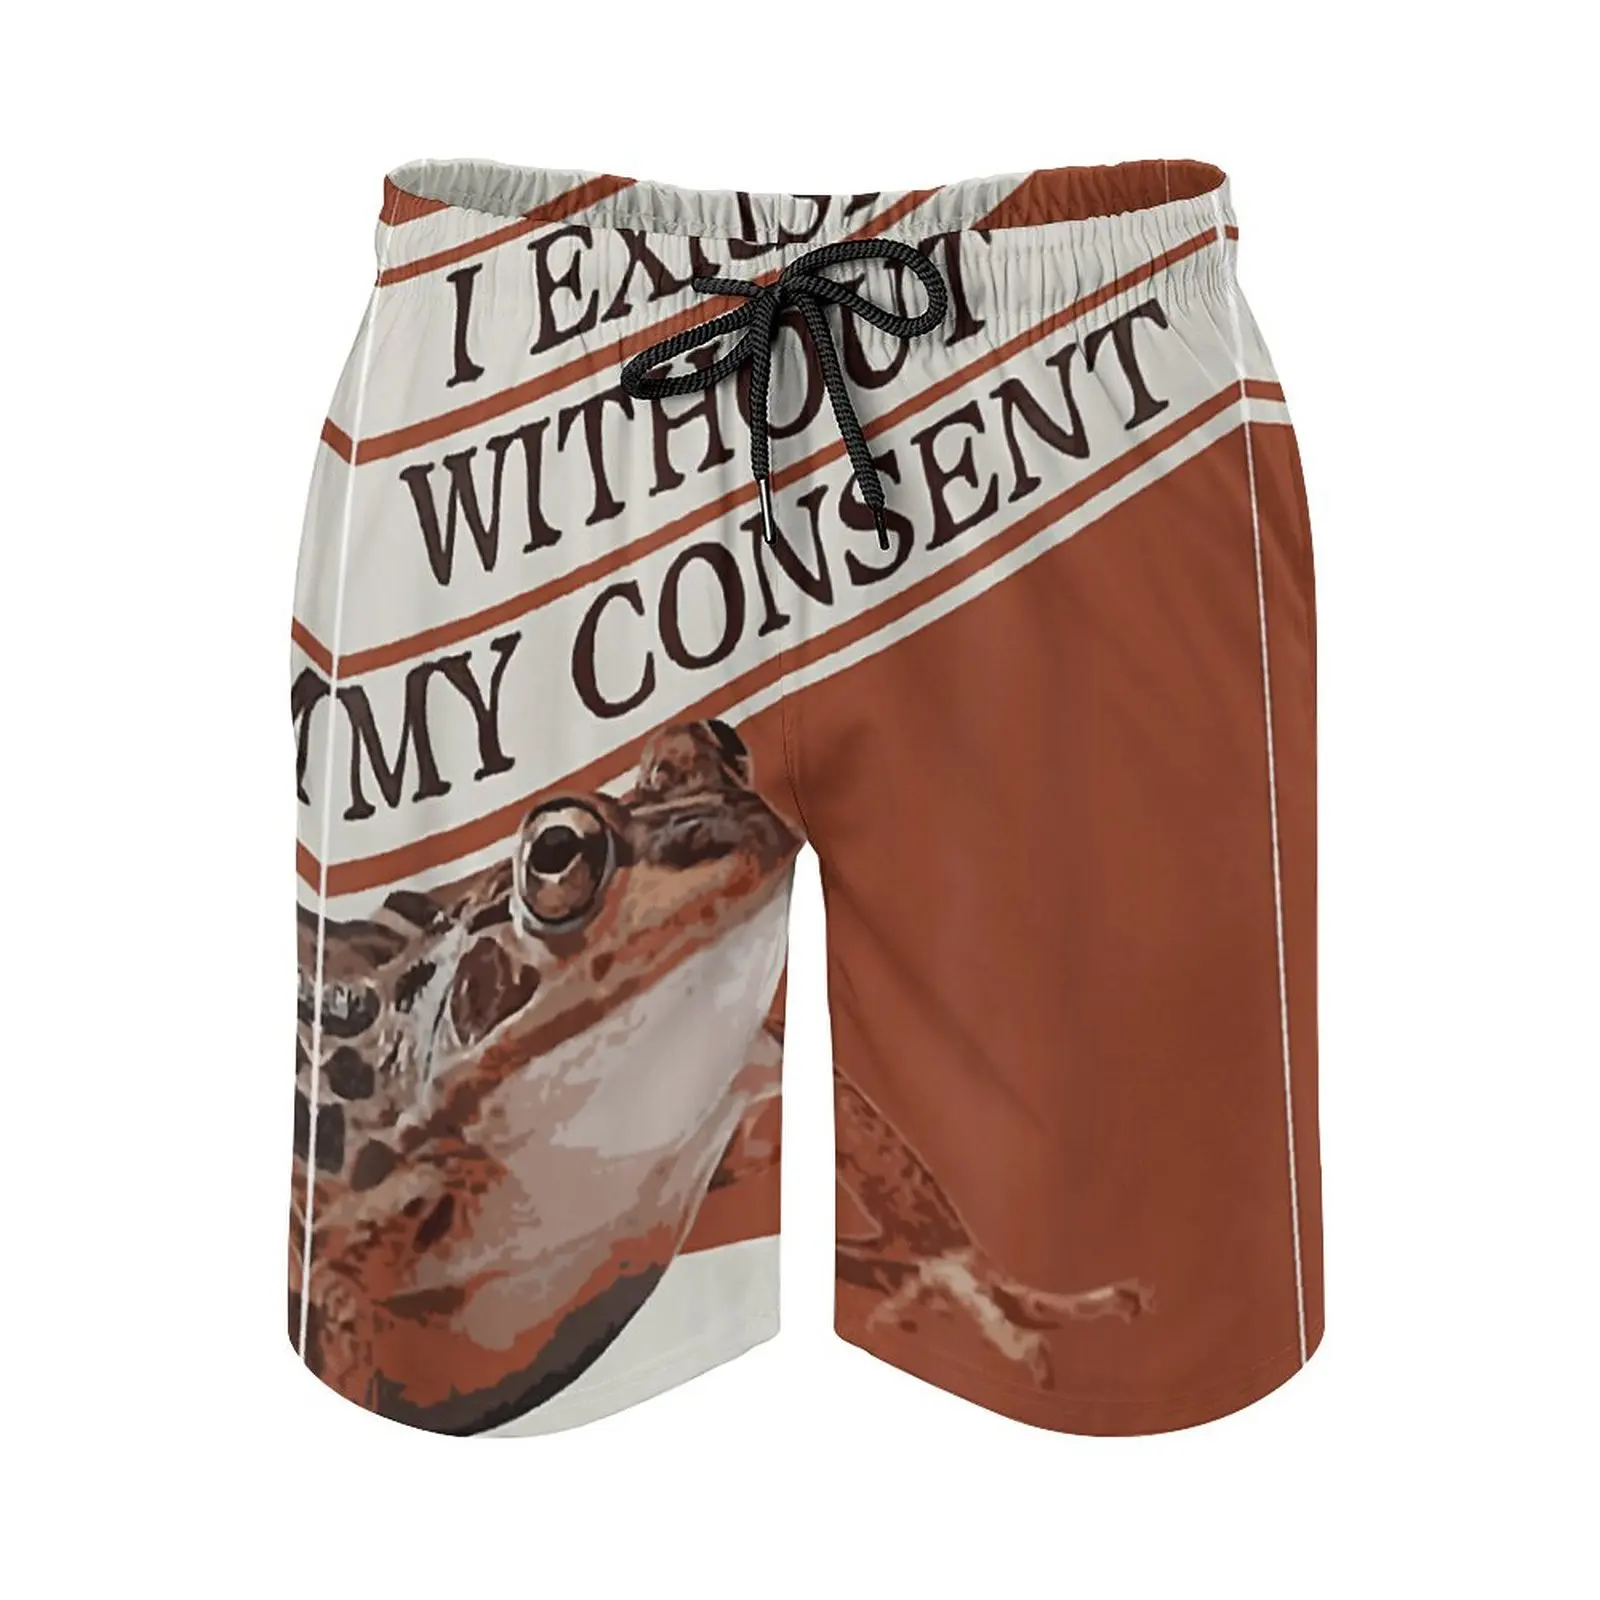 

Beach Pants Anime Beach I Exist Without My Consent Frog 3 Breathable Quick Dry Novelty Basketball Adjustable Drawcord Loose Elas